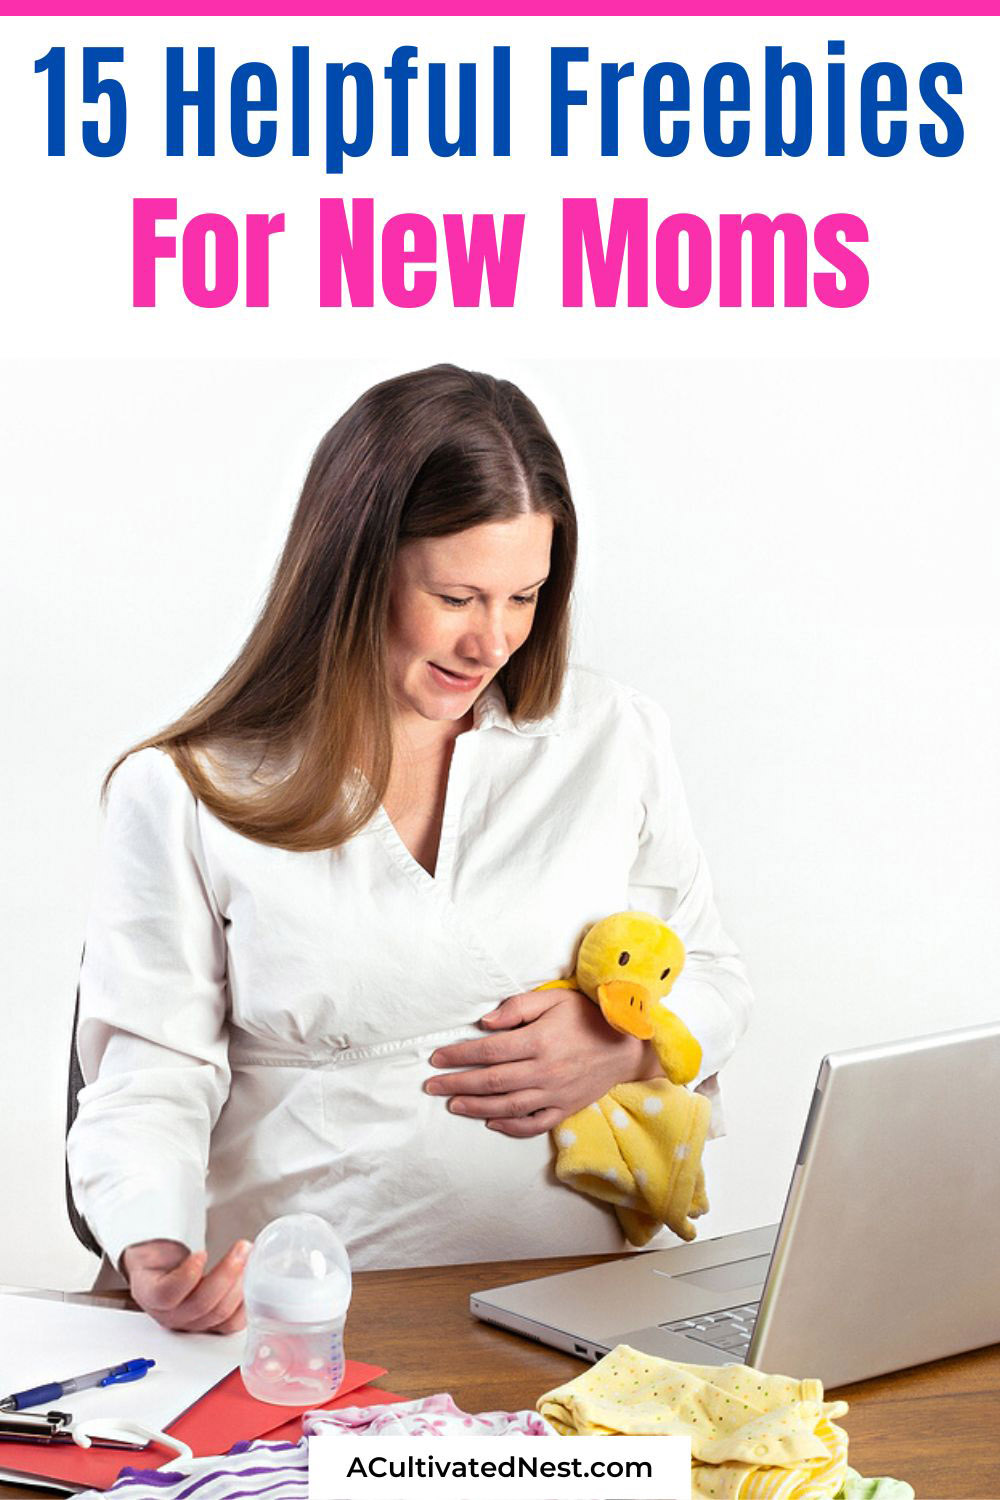 15 Freebies for New Moms- If you're a new mom, or about to become one, it's likely you'll enjoy saving money on your baby with these freebies for new moms! | free products for babies, free products for expectant mothers, freebies for mom-to-be, #moneySavingTips #frugalParenting #frugalLiving #momToBe #ACultivatedNest